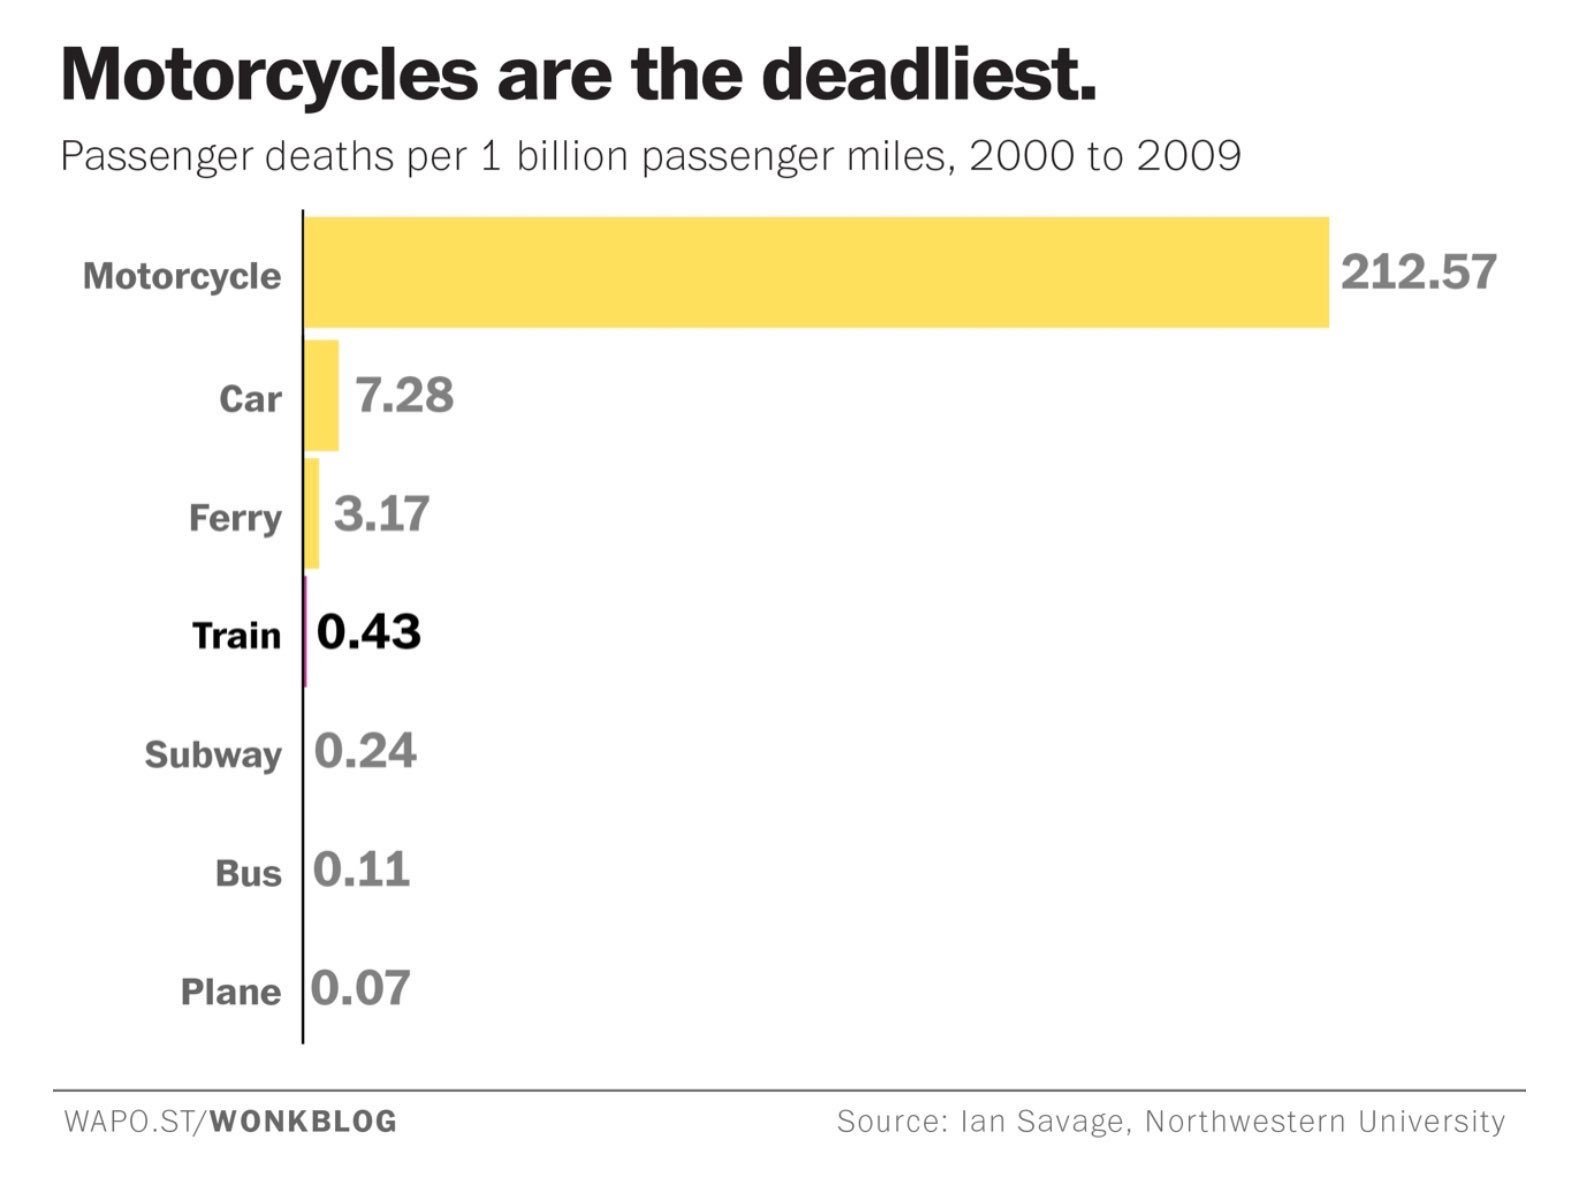 Chart shows that motorcycles are the most lethal transportation option